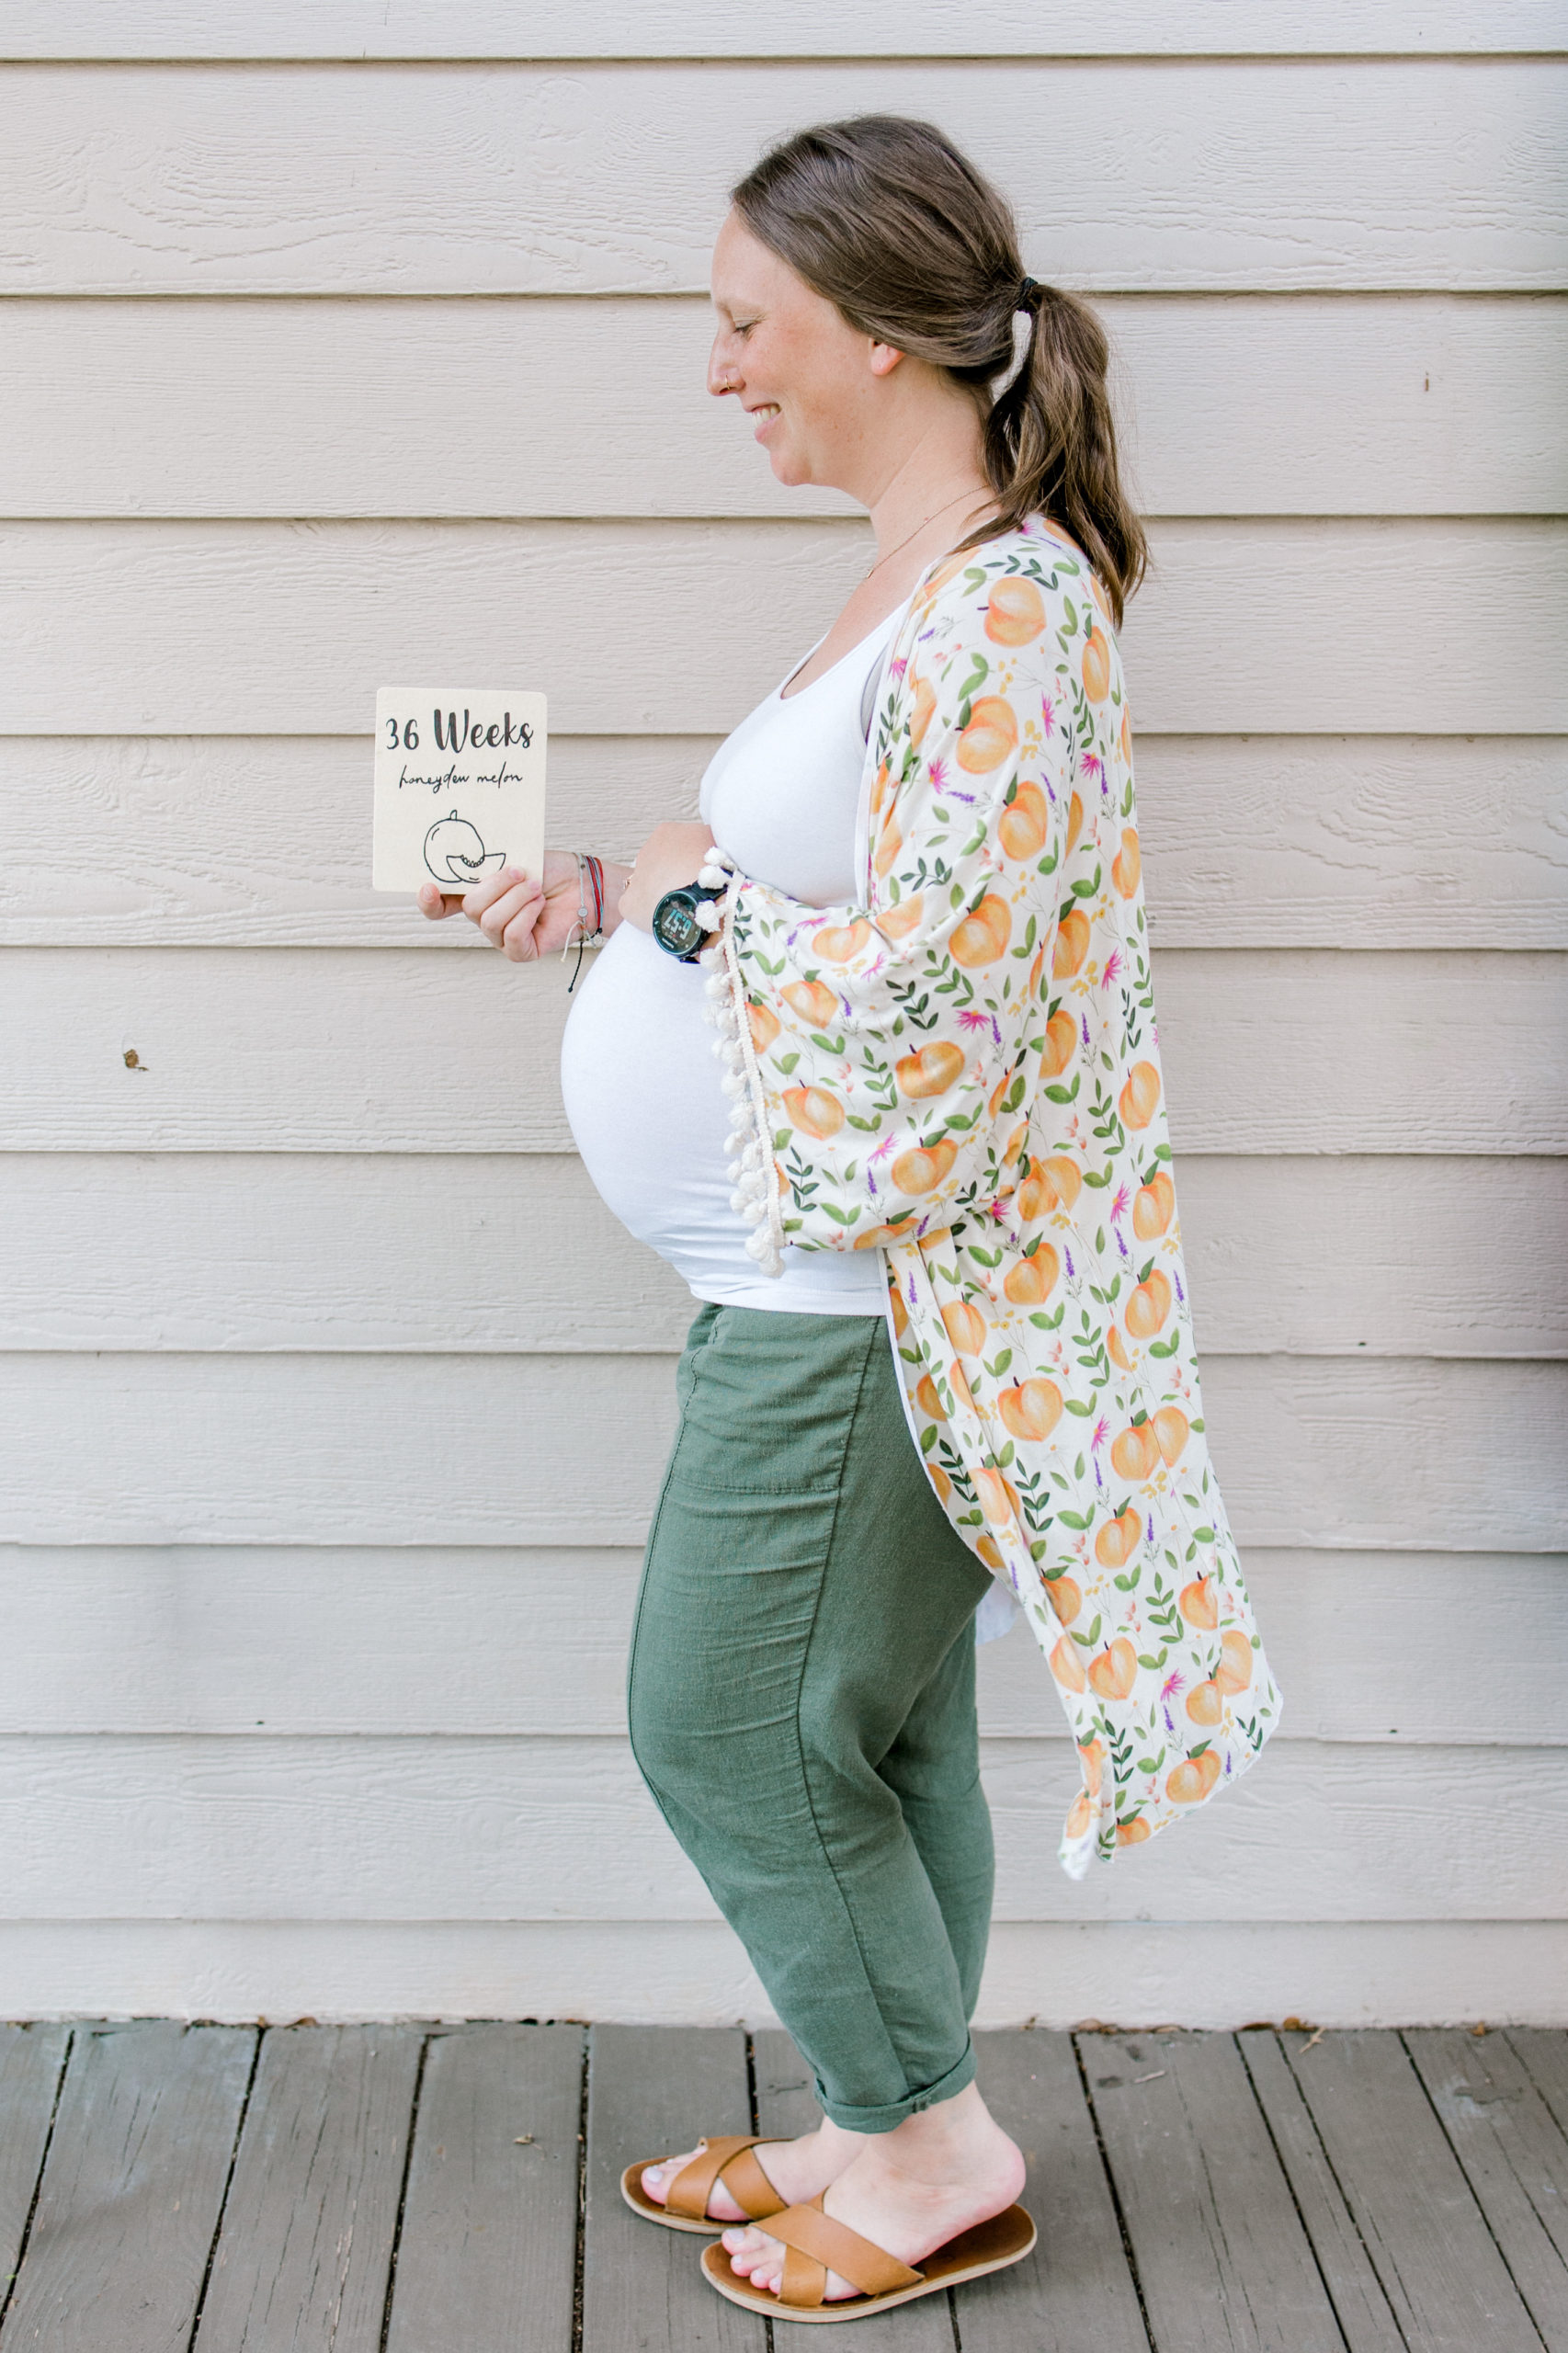 Week 36 Bumpdate | Baby H3 | read more at happilythehicks.com